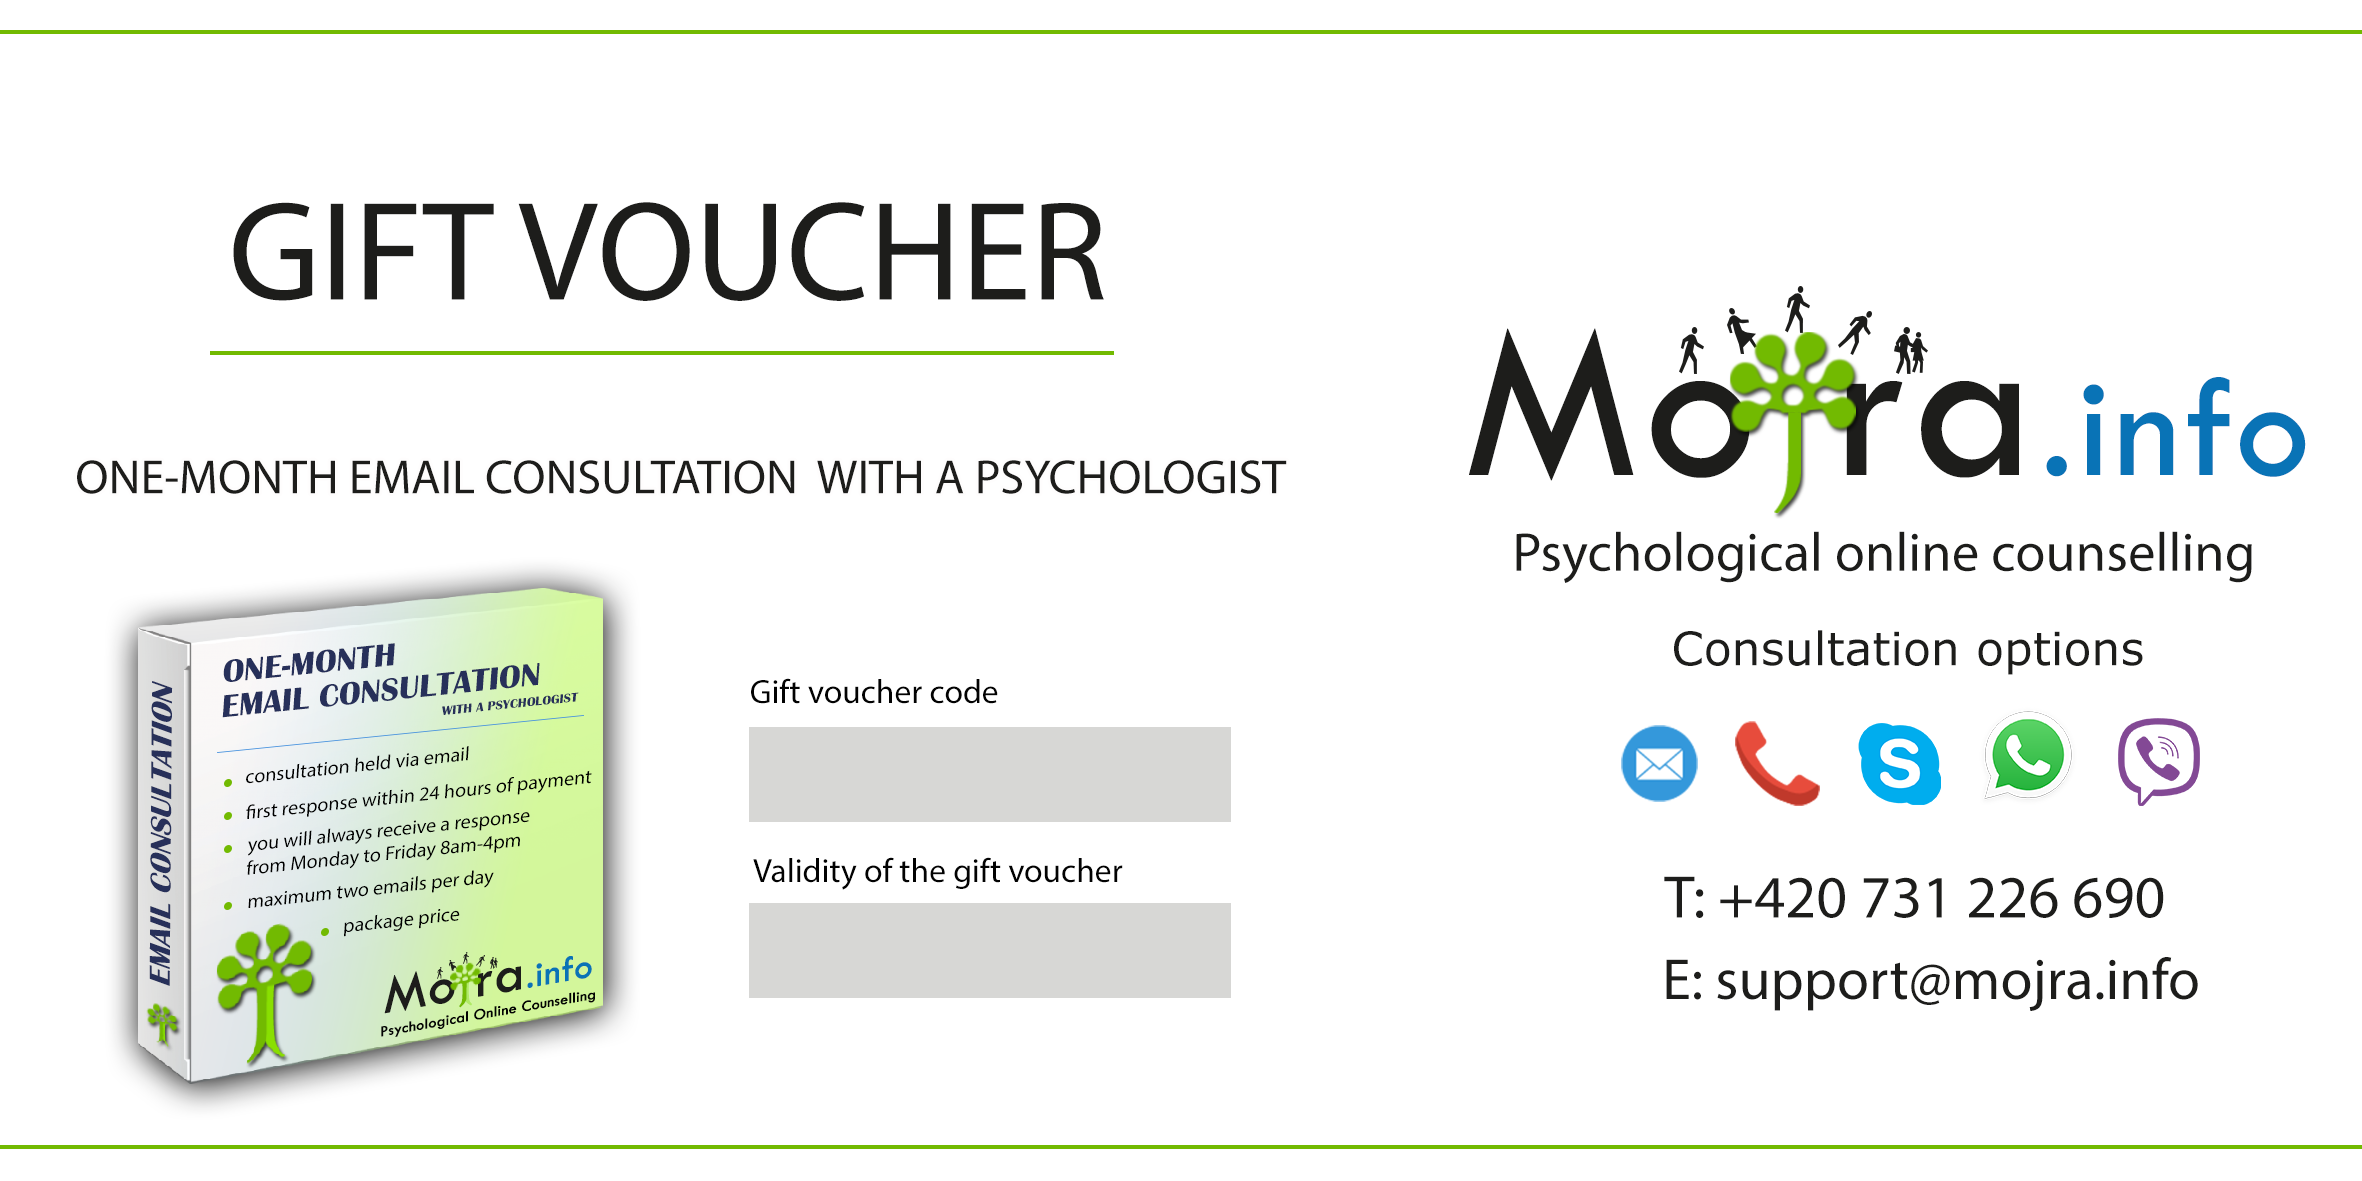 Gift Voucher: One-month Email consultation with a psychologist